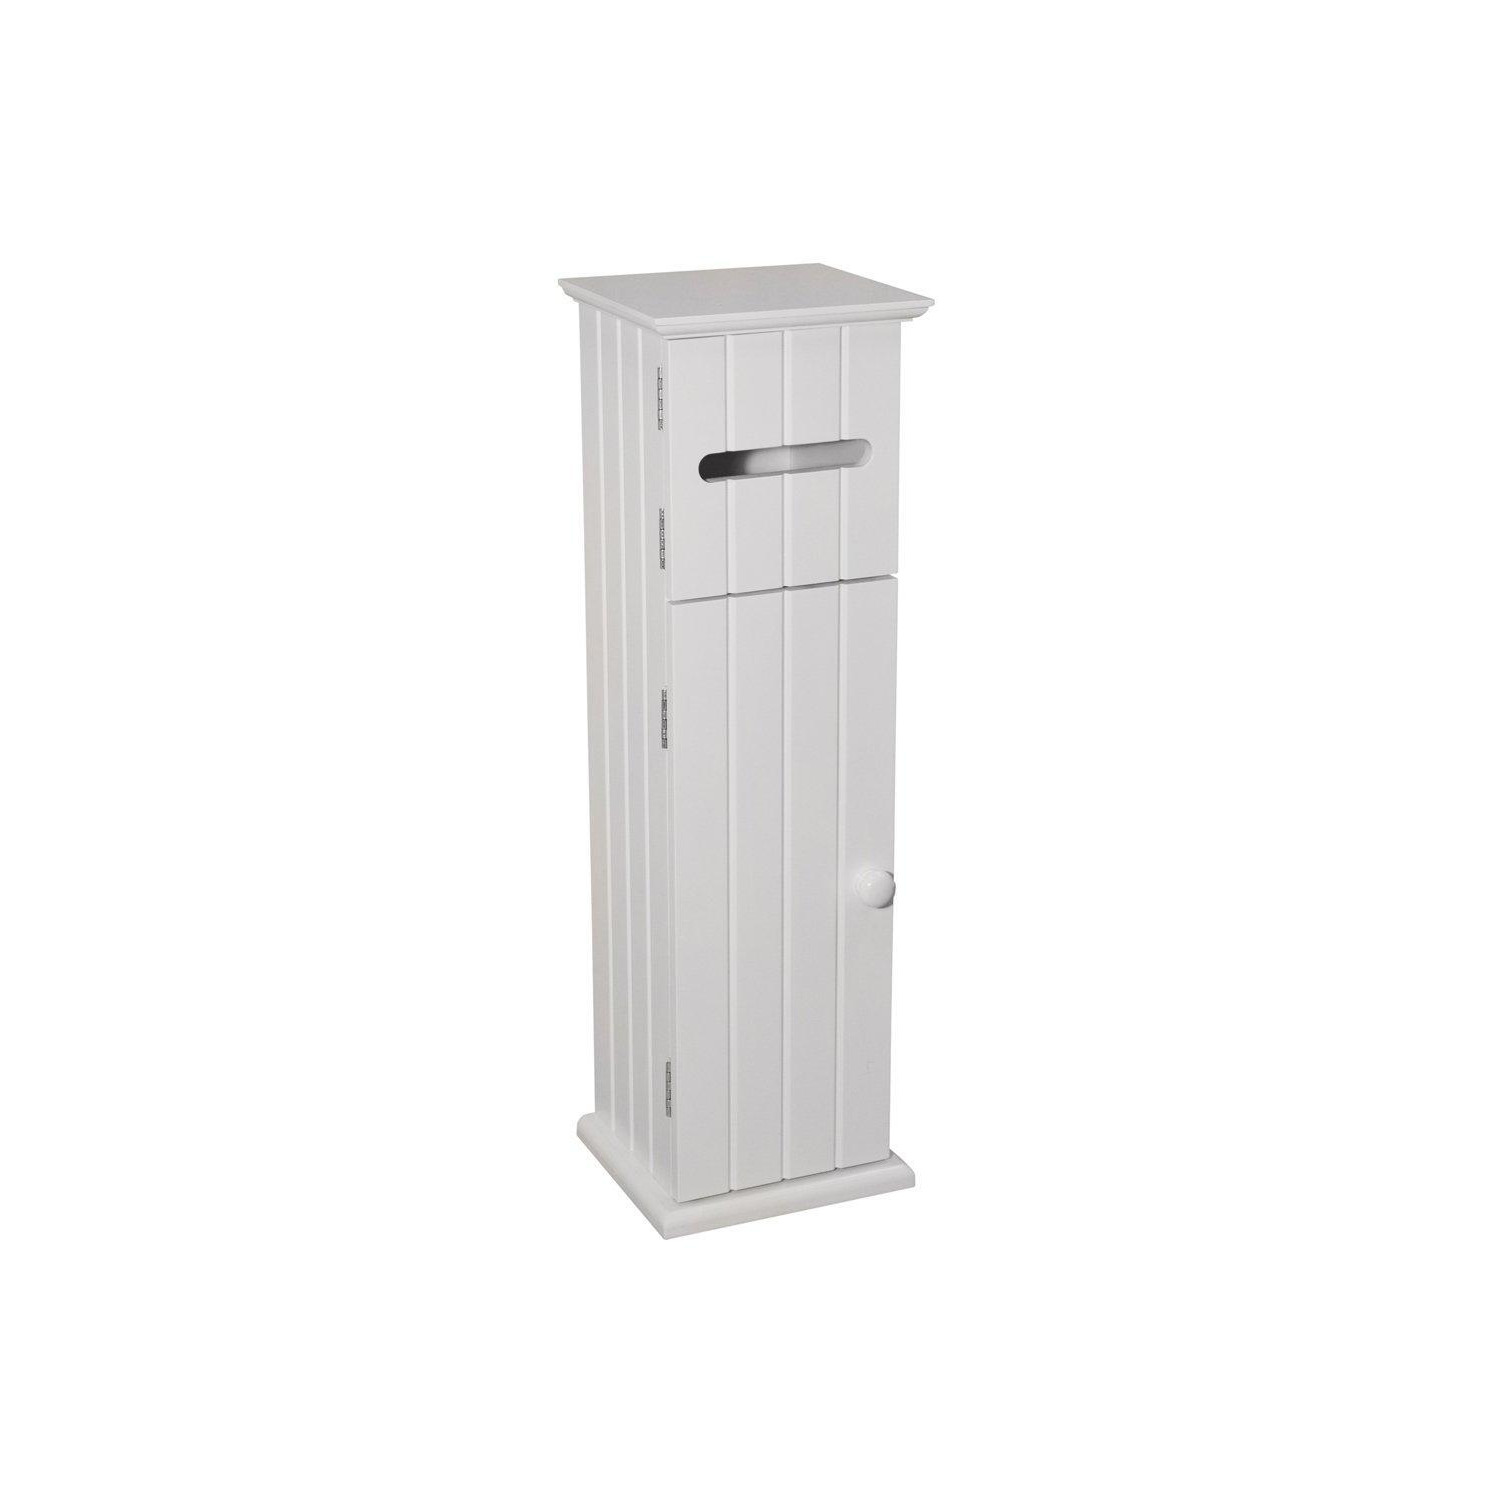 American Cottage  Shaker Toilet Roll Holder  Storage Cupboard  White - image 1